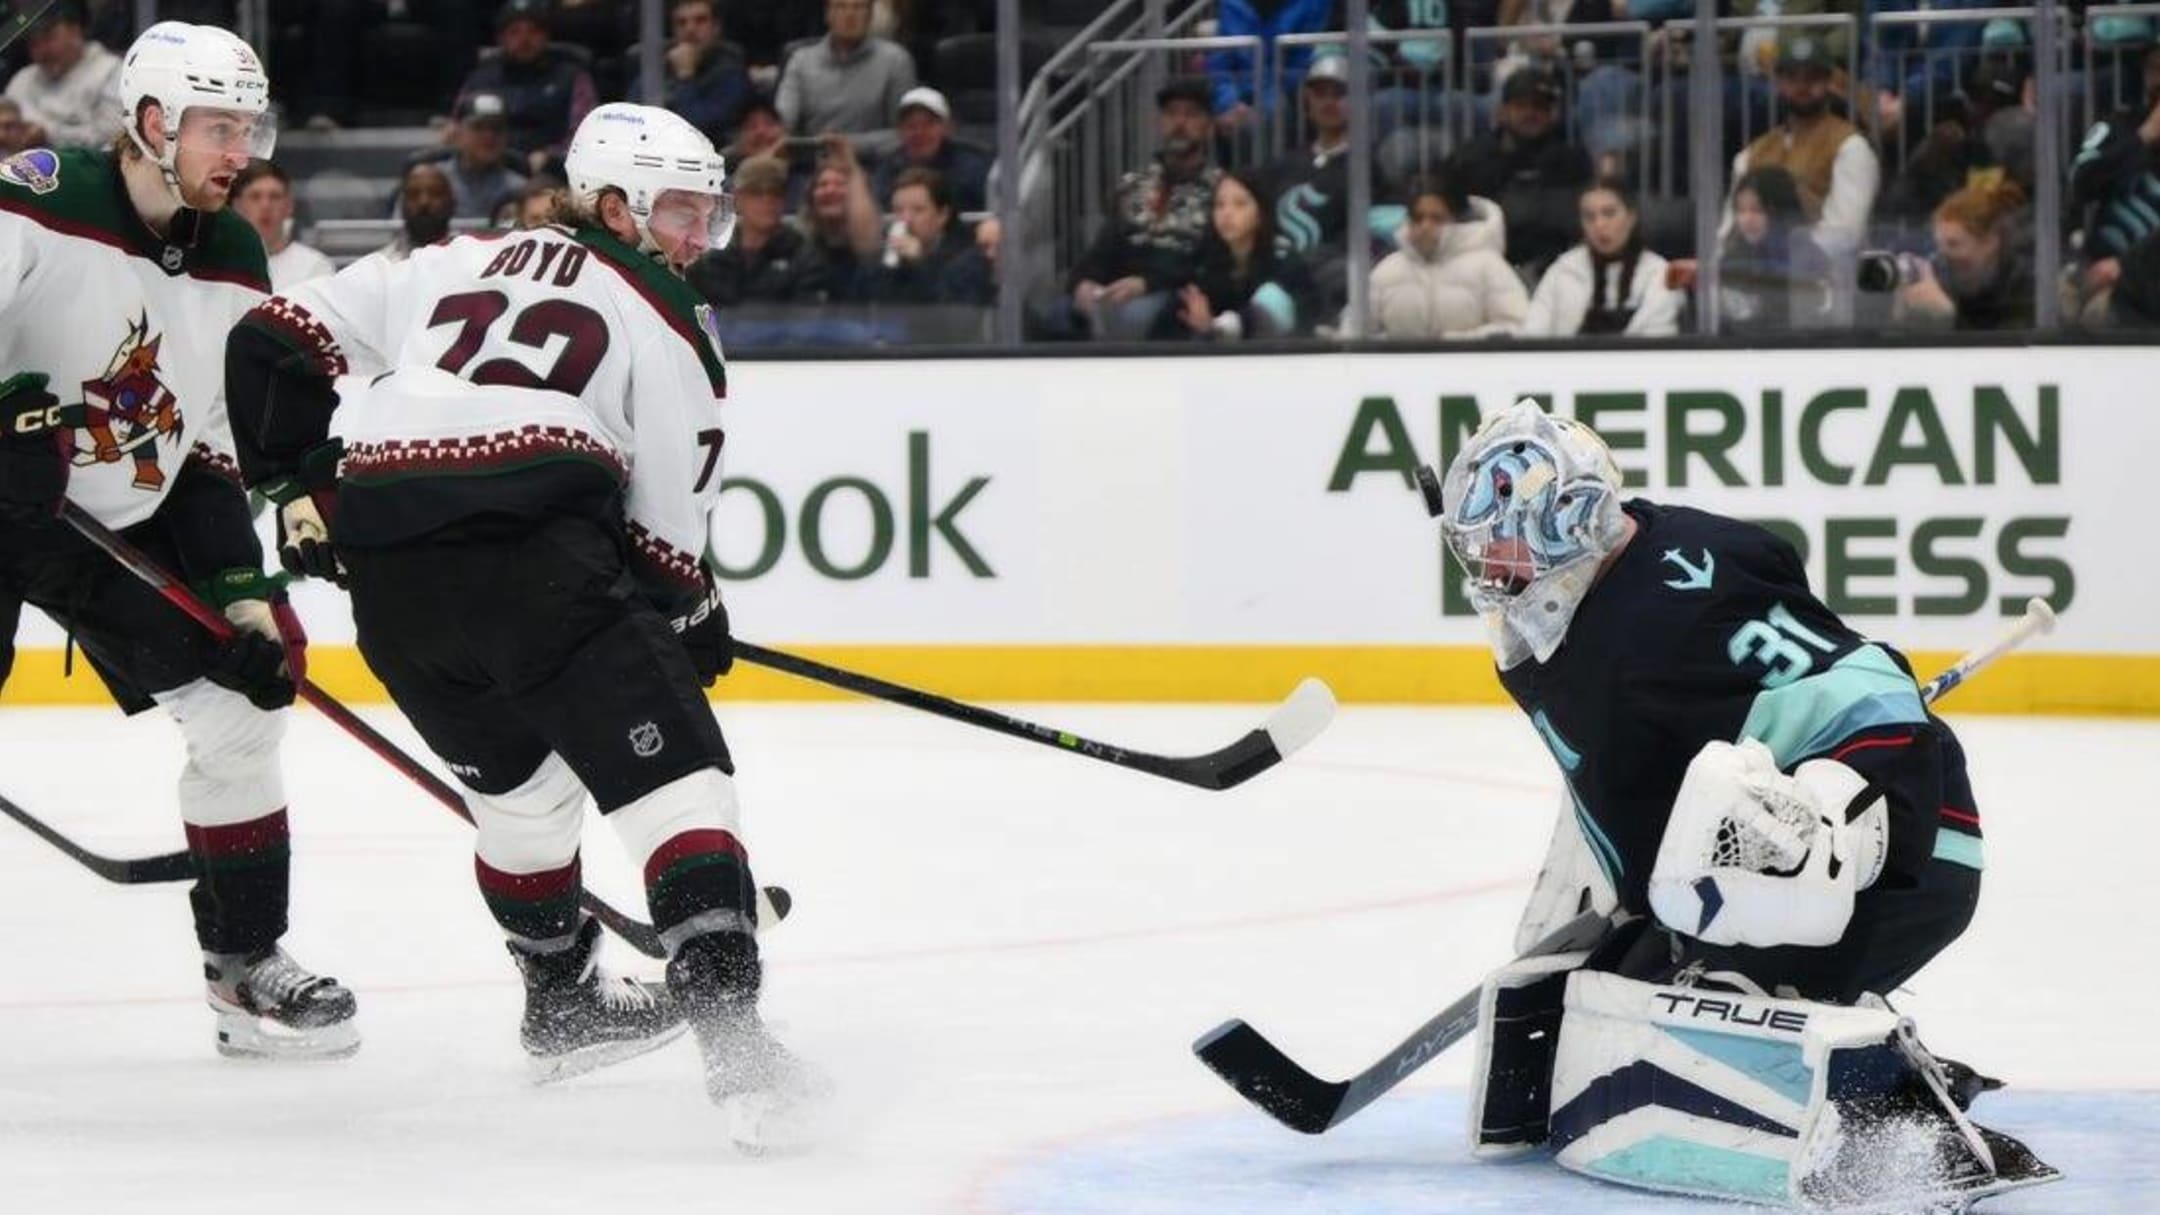 Kraken win 5th straight, reach 100 points, top Coyotes 4-1